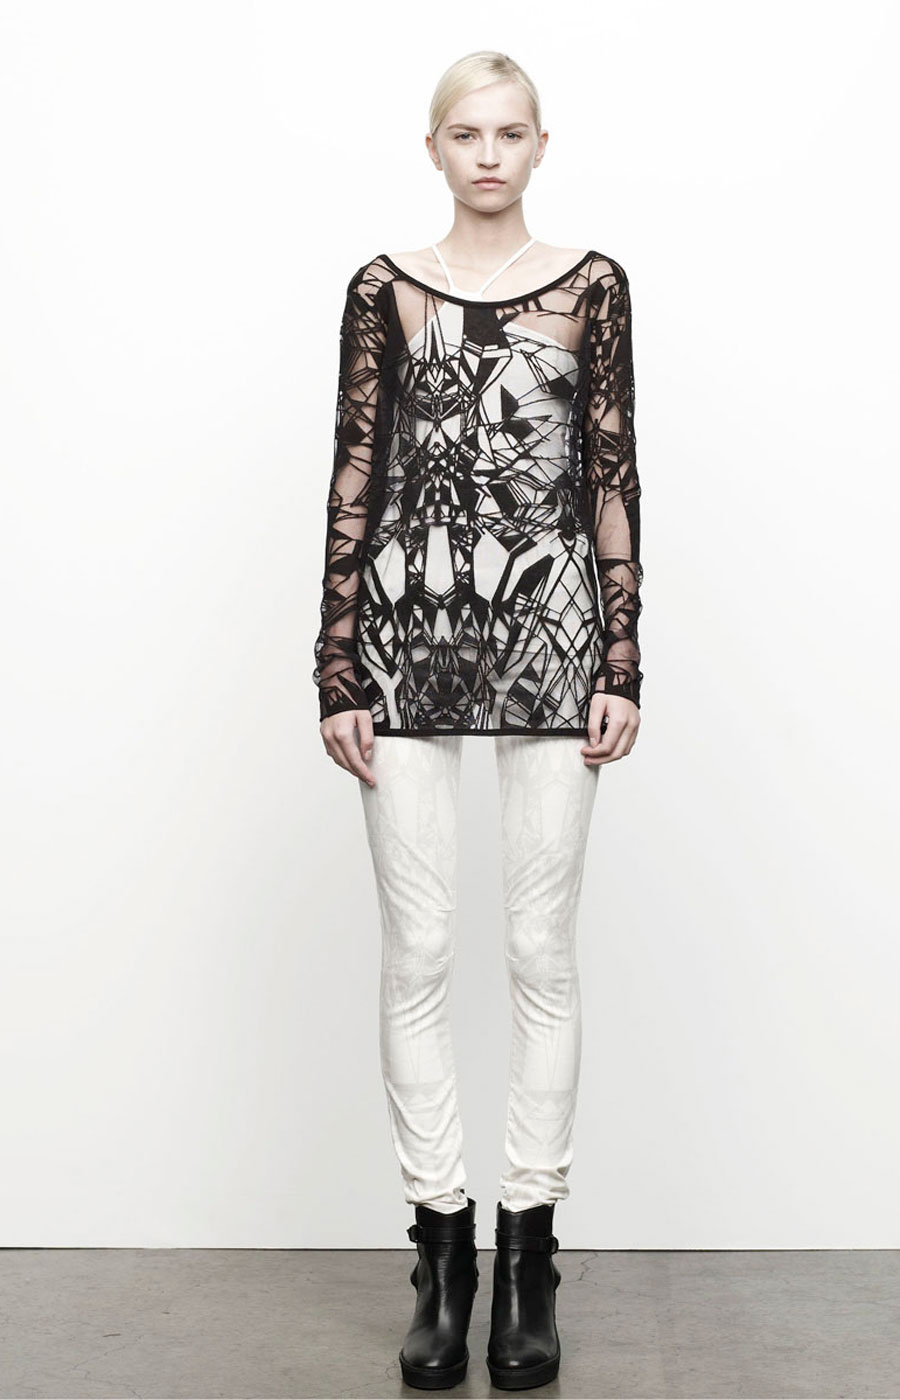 Pre-Fall 2012/2013 by Helmut Lang (6)